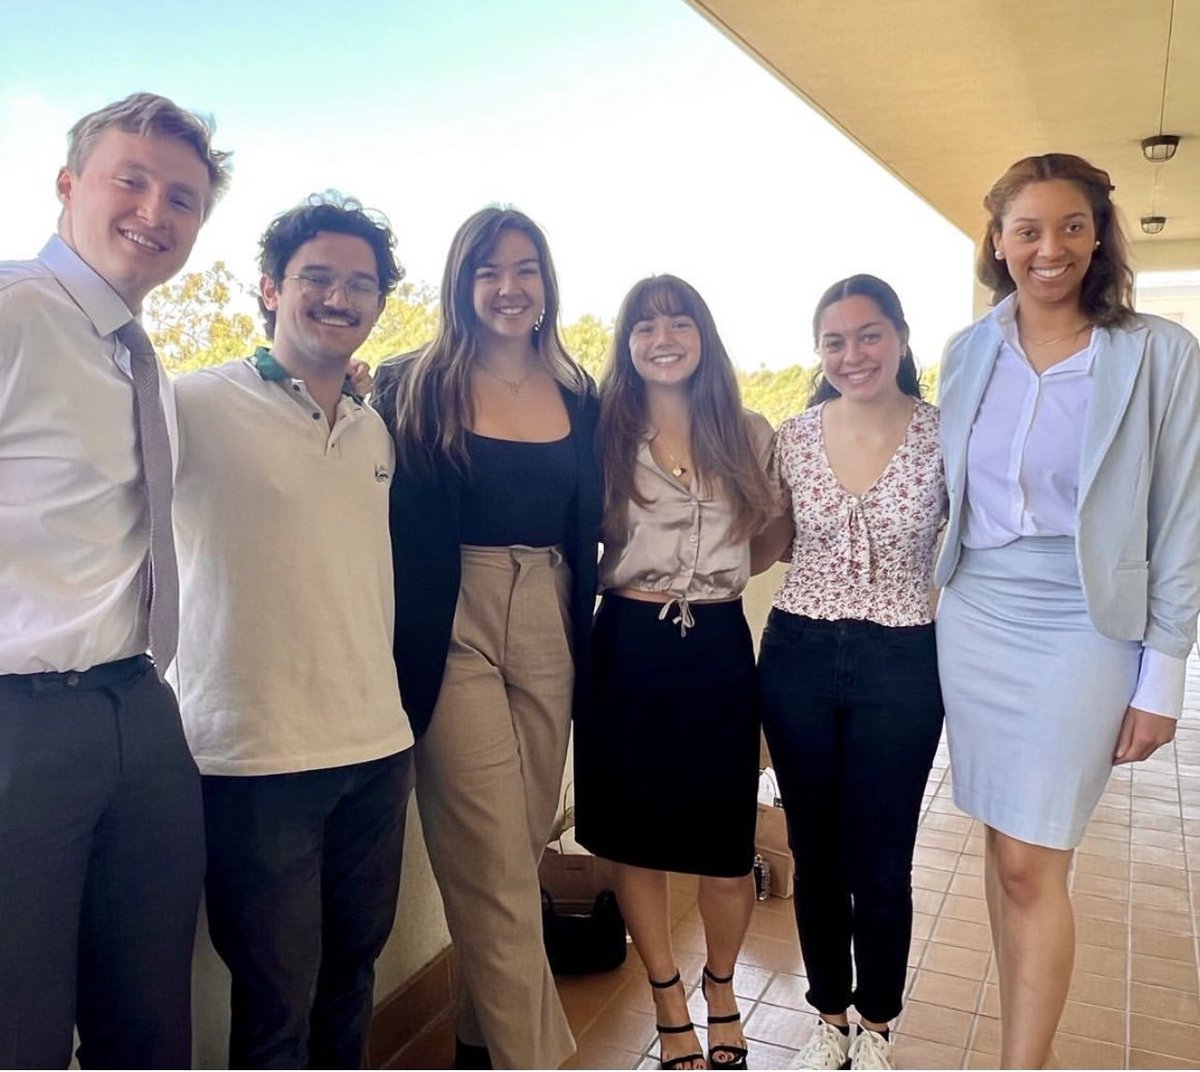 Thank you to the class of 2024 representatives for their words of wisdom at the last Student Life Committee of the Board of Trustees. Moderated by Drew Hartz, ASLMU President Panelists Aria Fulton Clare Houston Gabriel Mouritzen Aiden Pidgeon Makenna Robinson Jacki Raetz-Vigon